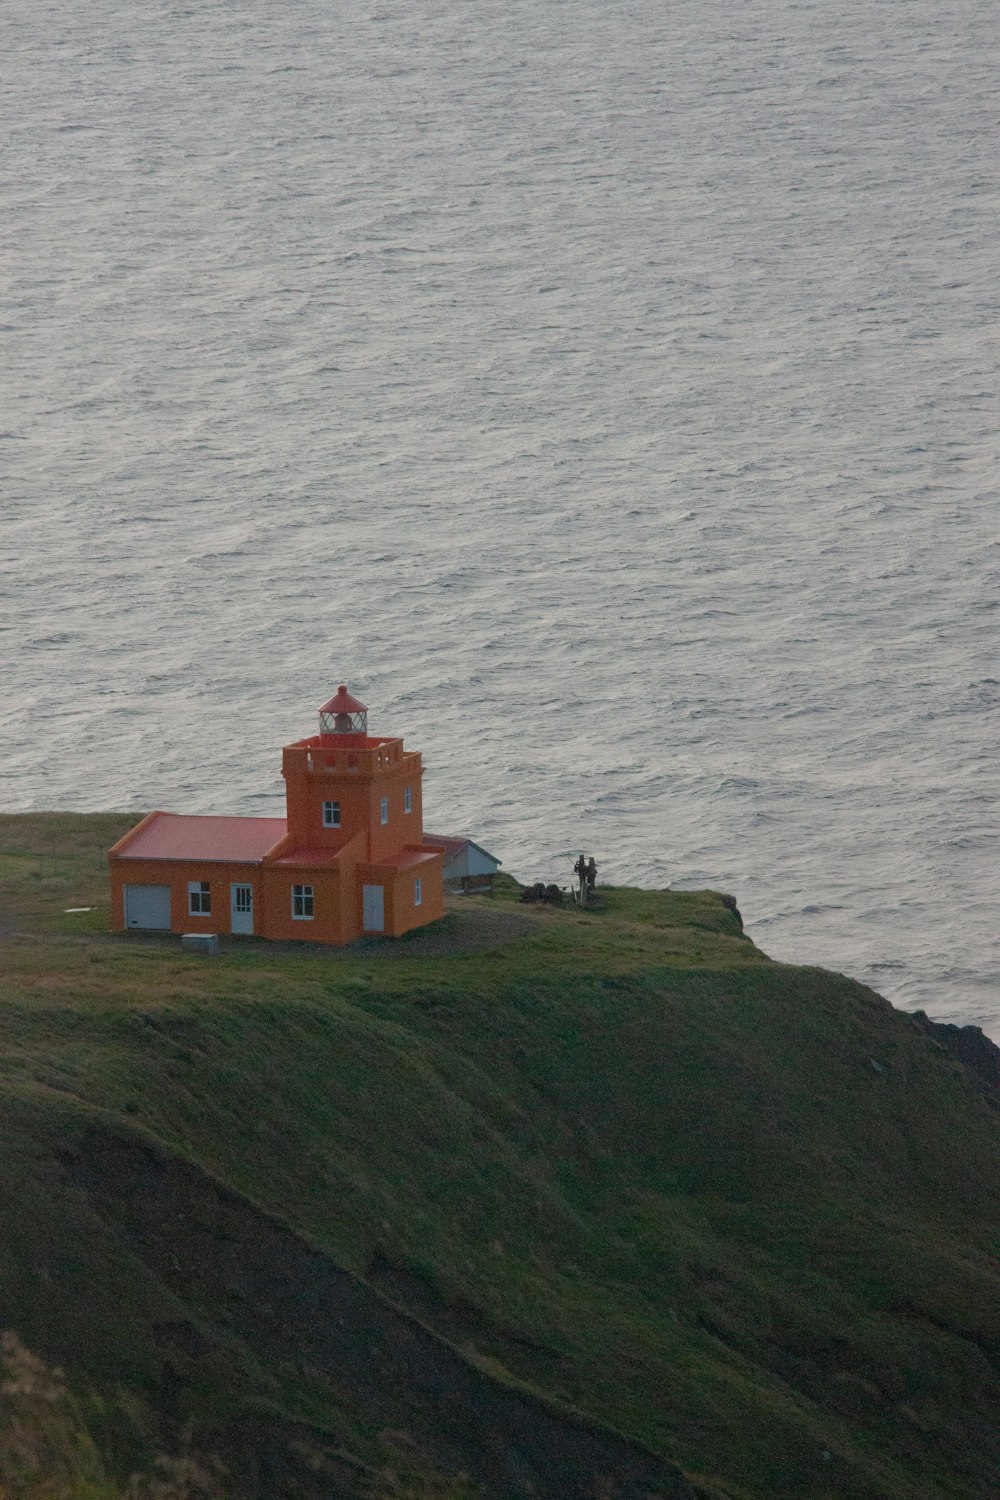 a small orange building sitting on top of a hill next to the ocean